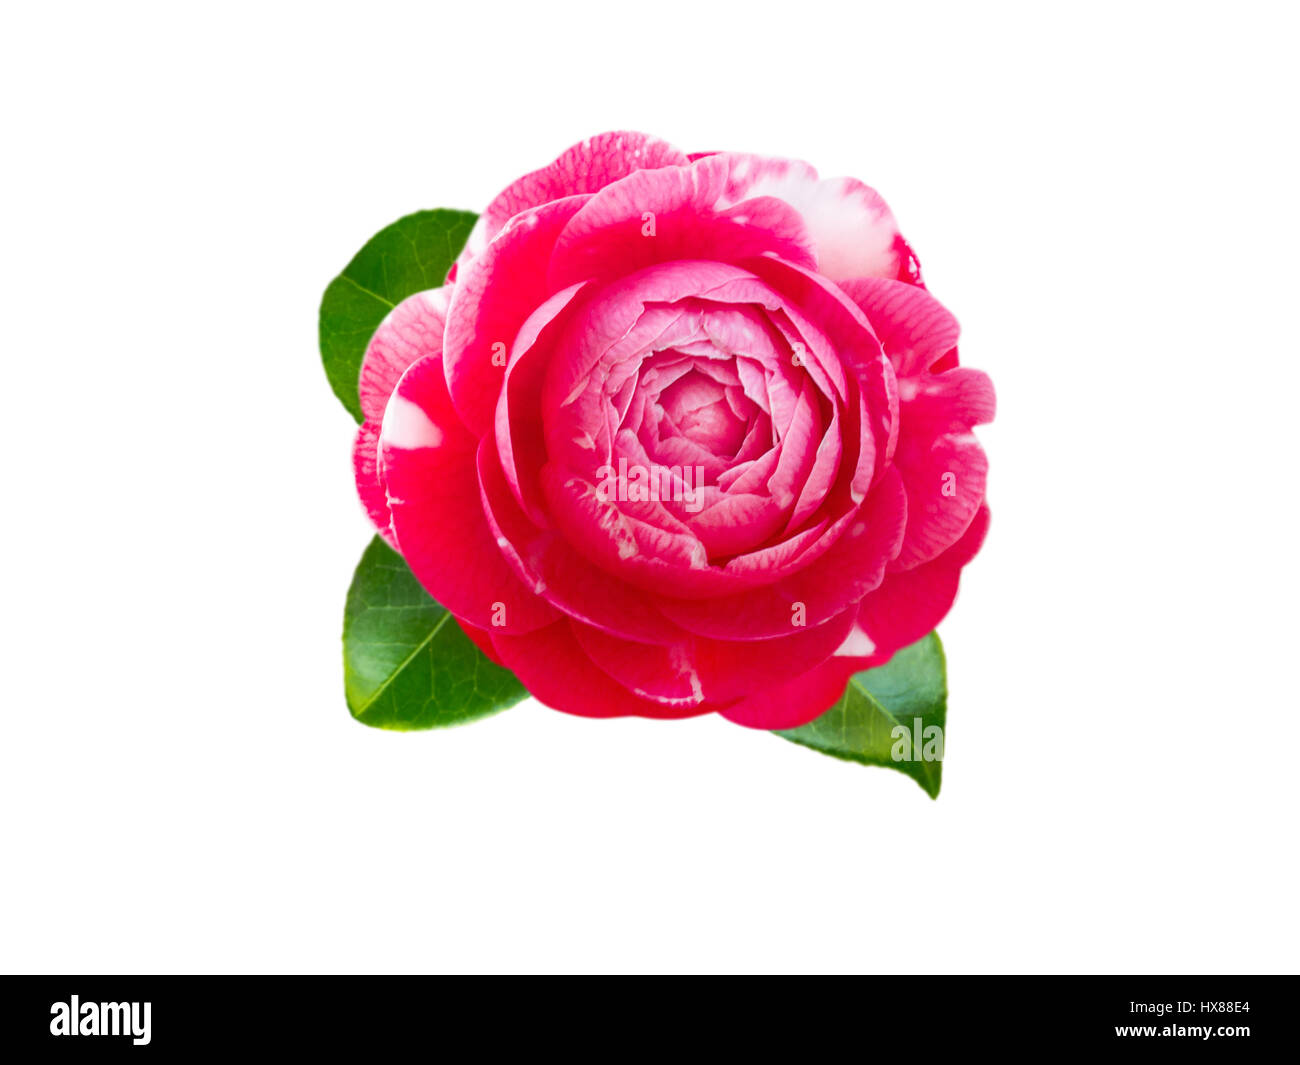 White and pink bicolor camellia rose form flower with leaves isolated on white Stock Photo